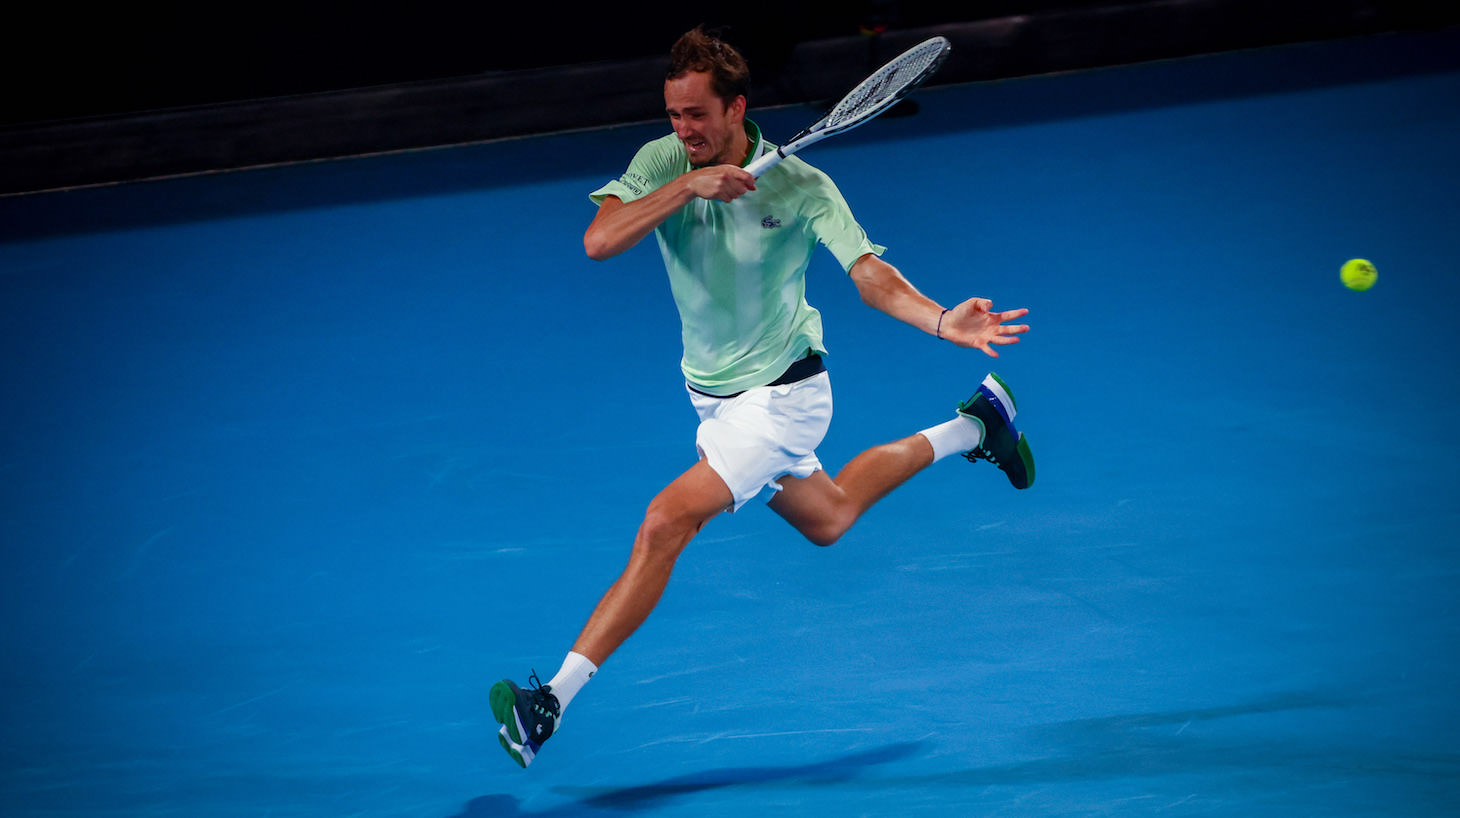 Russian Danii Medvedev (ATP 2) pictured in action during the 'Australian Open' Grand Slam tennis tournament, Wednesday 26 January 2022 in Melbourne Park, Melbourne, Australia. The 2022 edition of the Australian Grand Slam takes place from January 17th to January 30th. BELGA PHOTO PATRICK HAMILTON (Photo by PATRICK HAMILTON/BELGA MAG/AFP via Getty Images)